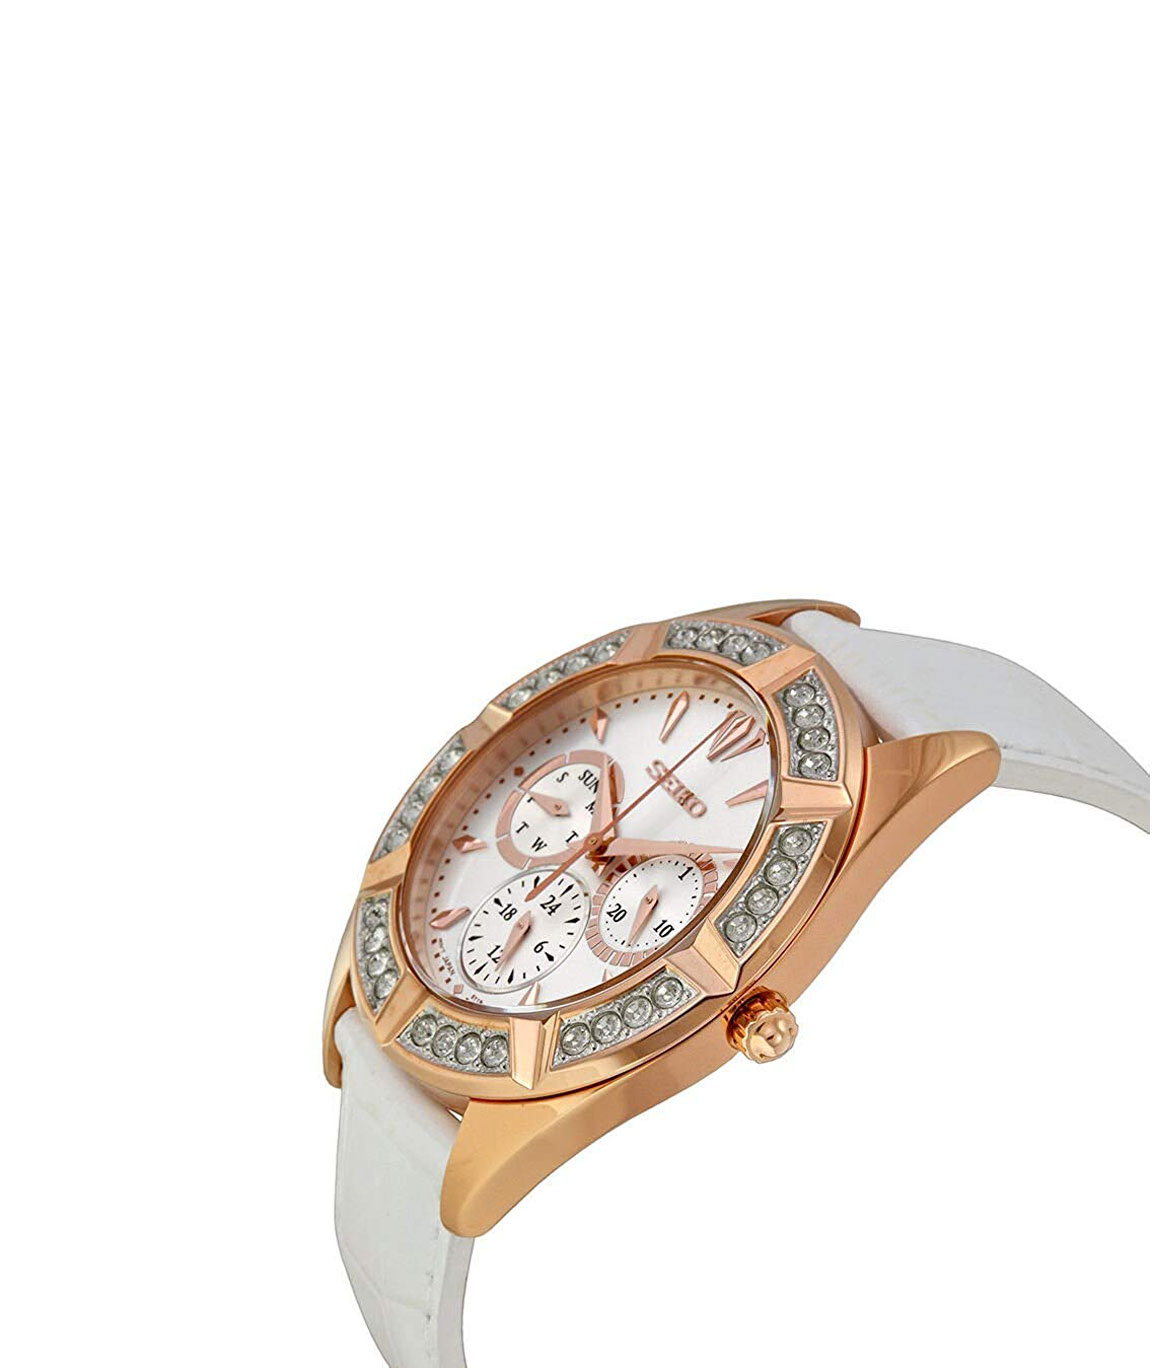 Lord Timepieces Bolt Rose Gold Review - The Time Bum